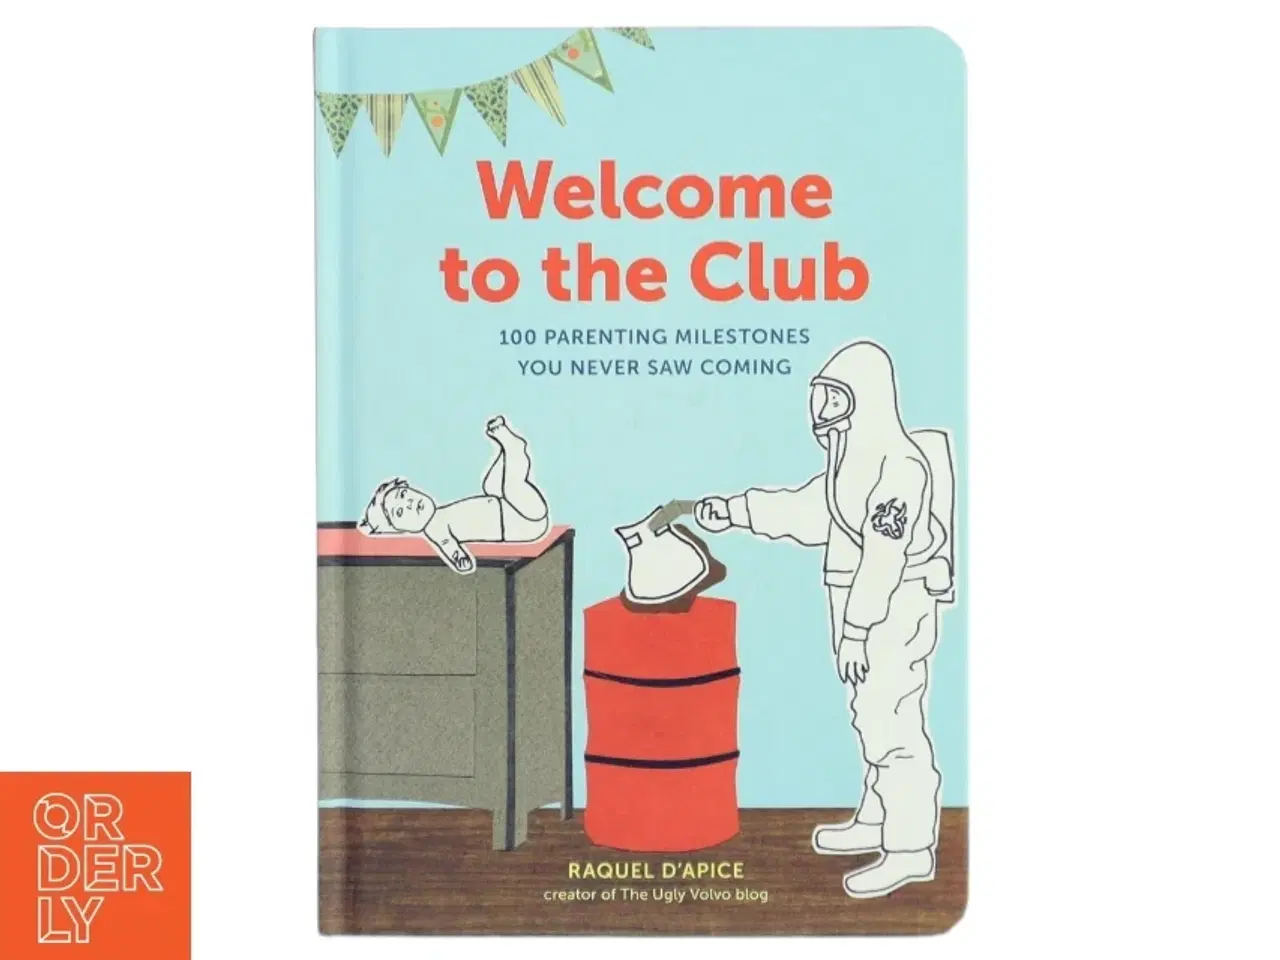 Billede 1 - Welcome to the Club: 100 Parenting Milestones You Never Saw Coming af Raquel D'Apice (Bog)